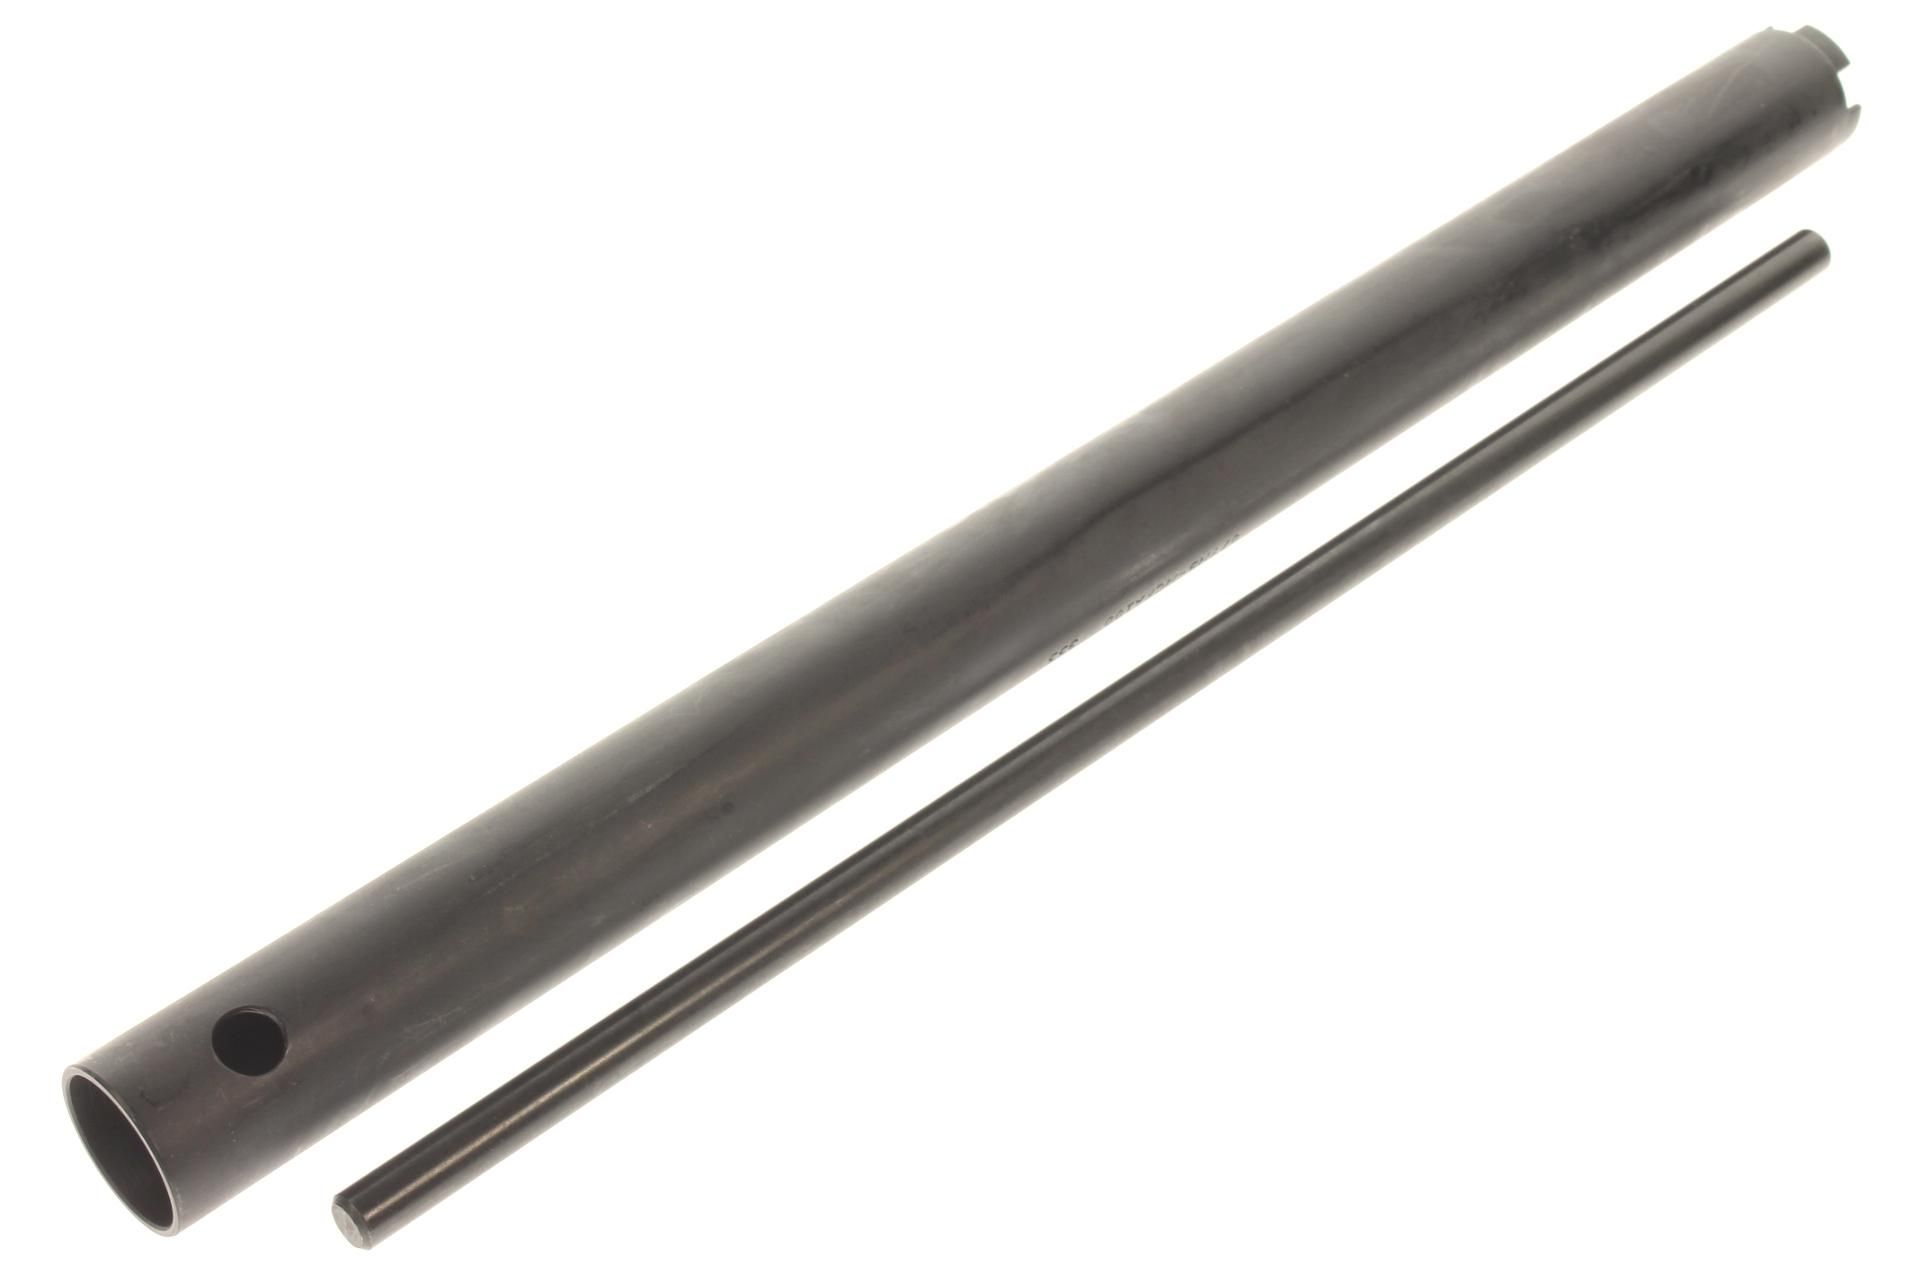 07YMB-MCF0101 Superseded by 07YMB-MCFA100 - HOLDER, FORK ROD